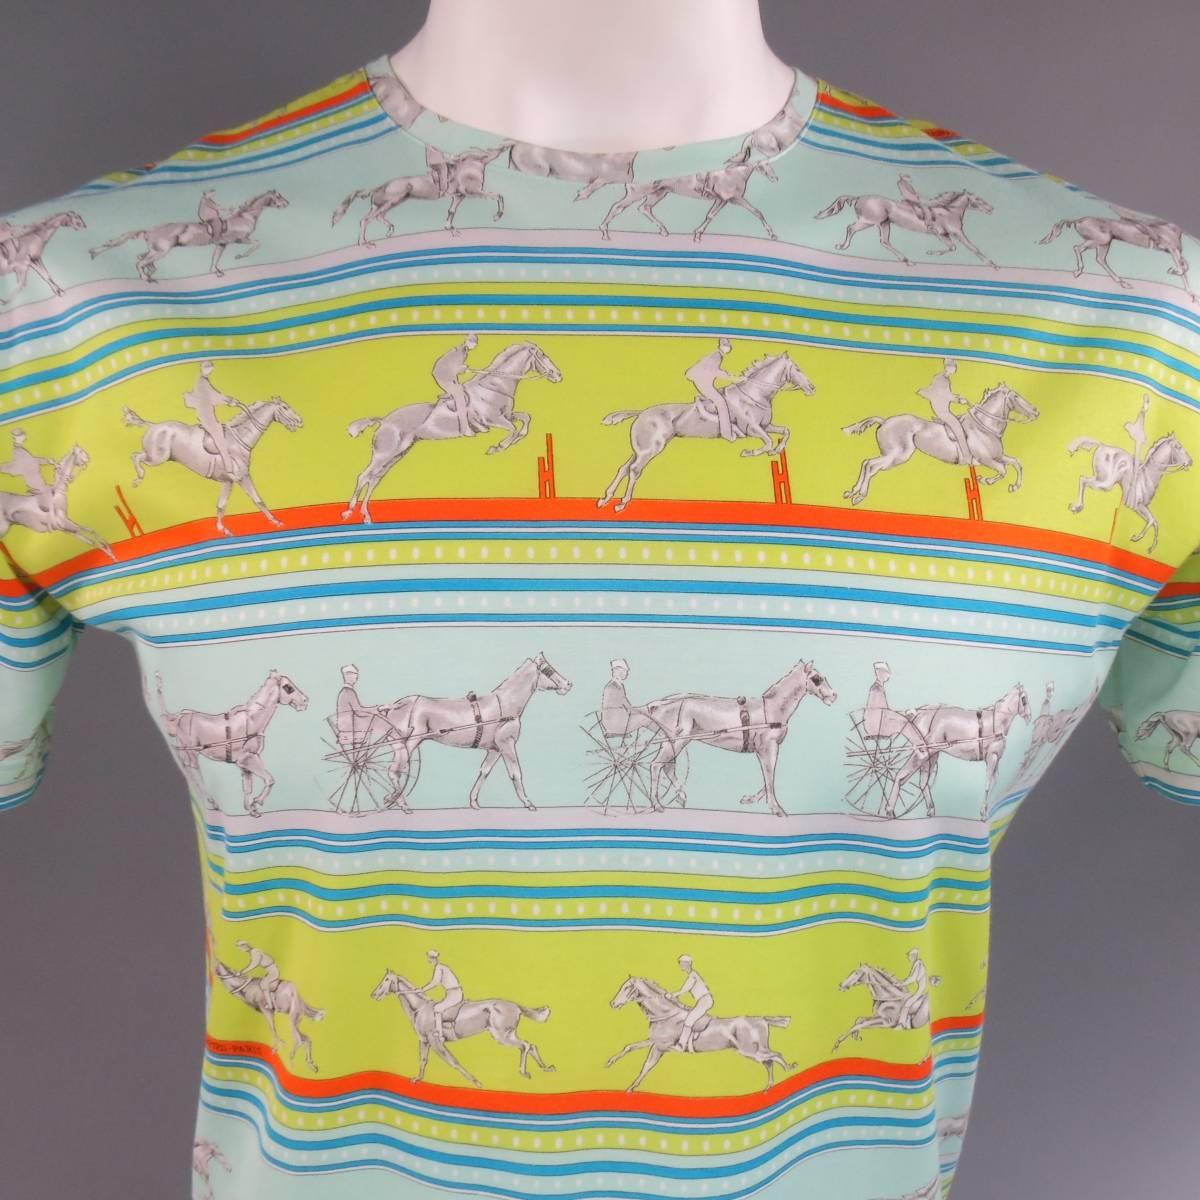 Vintage HERMES short sleeve T-shirt in light weight, semi sheer cotton with all over horse rider "Sequences" print featuring gray horses, light blue, lime green and teal stripes with Hermes signature orange details. Made in Italy.
